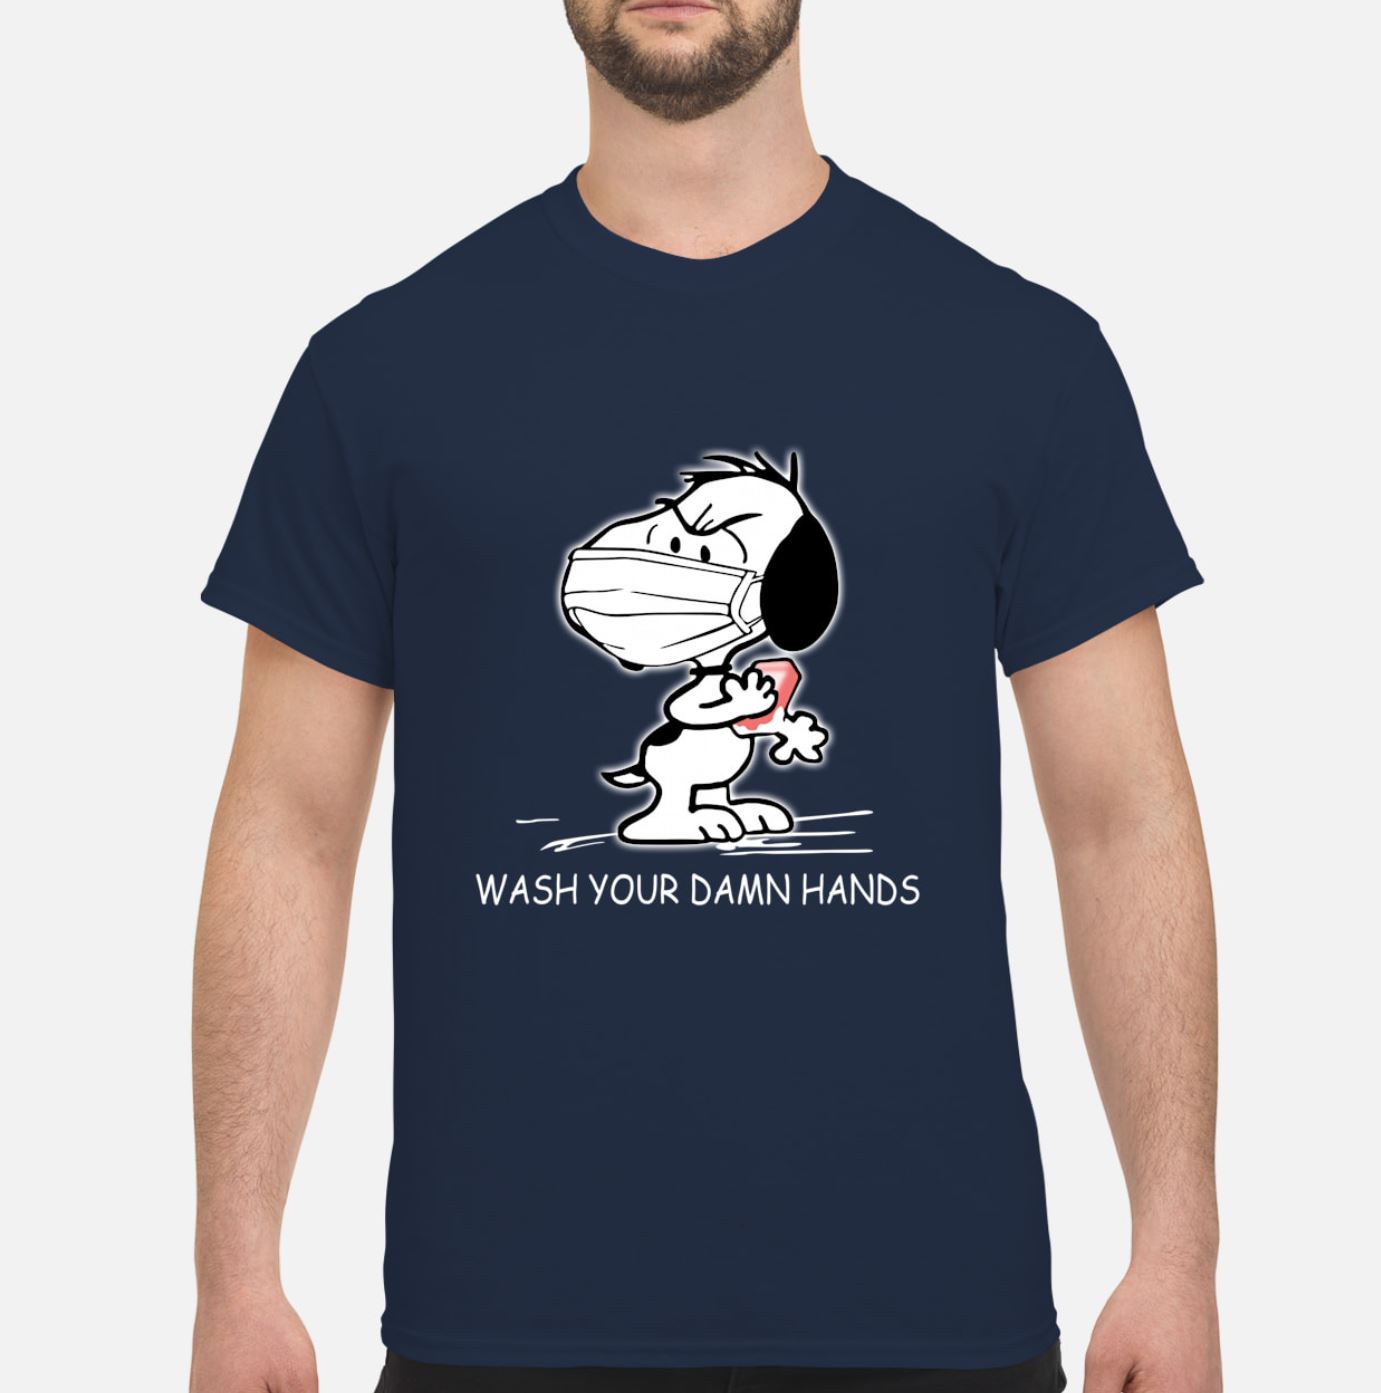 Snoopy wearing mask wash your damn hands shirt